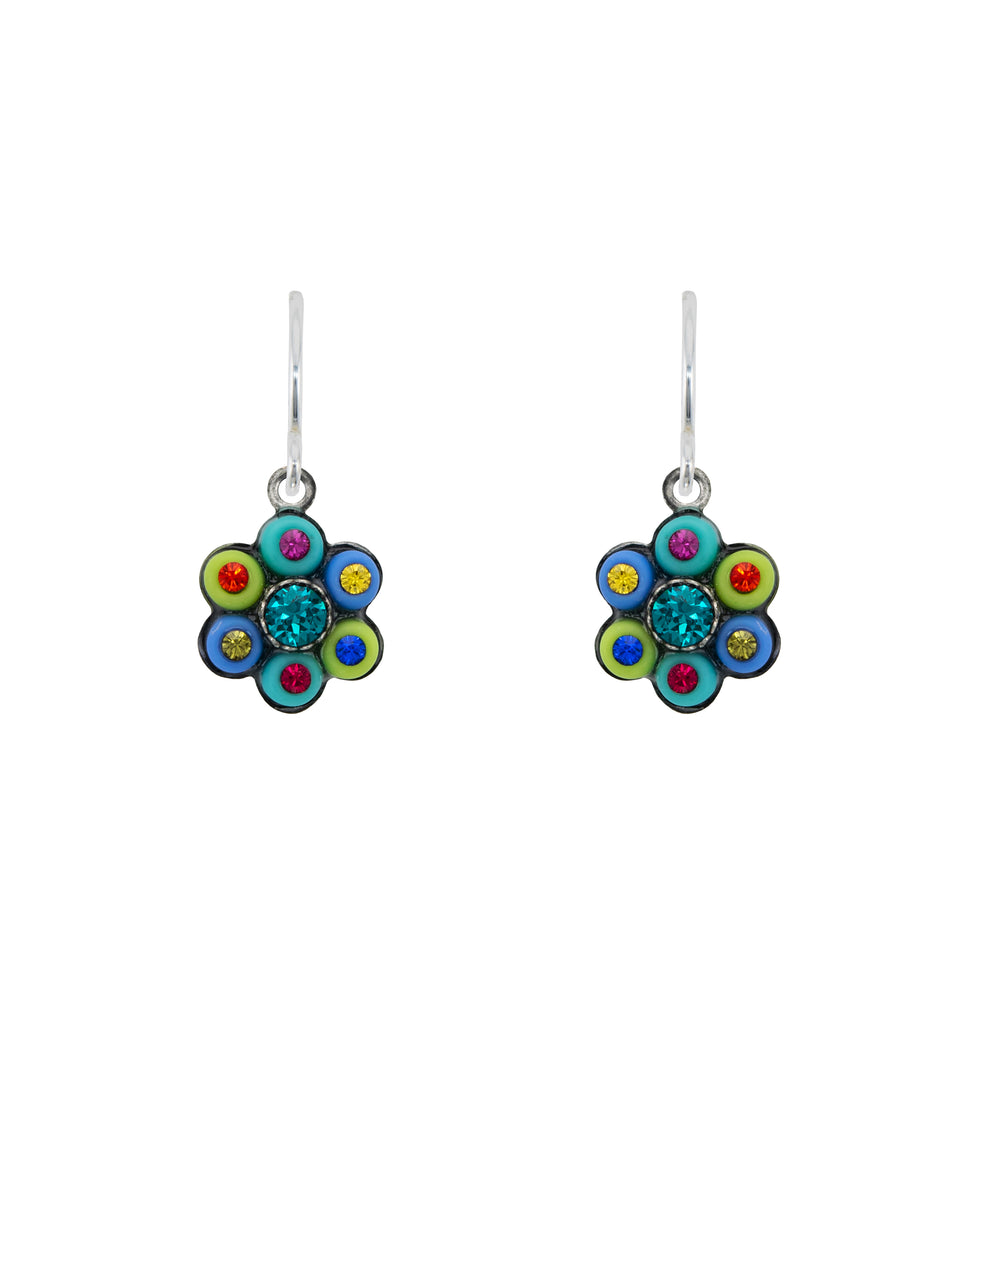 Firefly Mosaics: Flower Earrings from The Botanical Collection